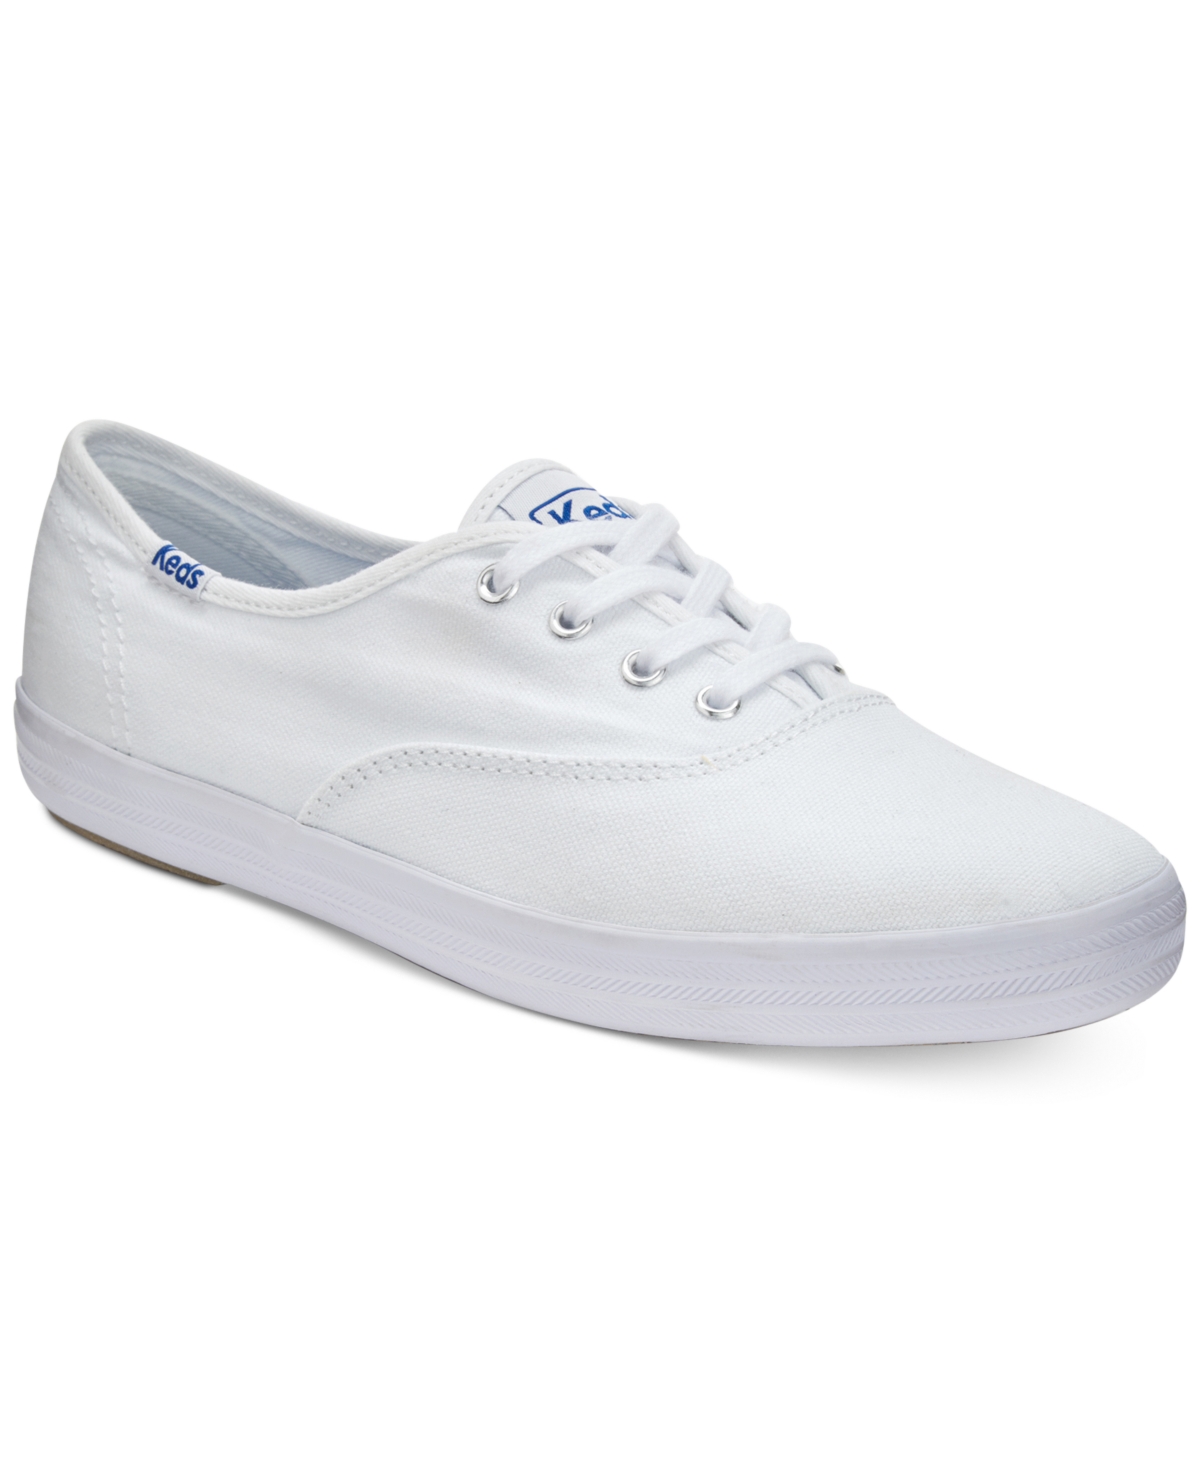 UPC 044209485169 product image for Keds Women's Champion Ortholite Lace-Up Oxford Fashion Sneakers from Finish Line | upcitemdb.com